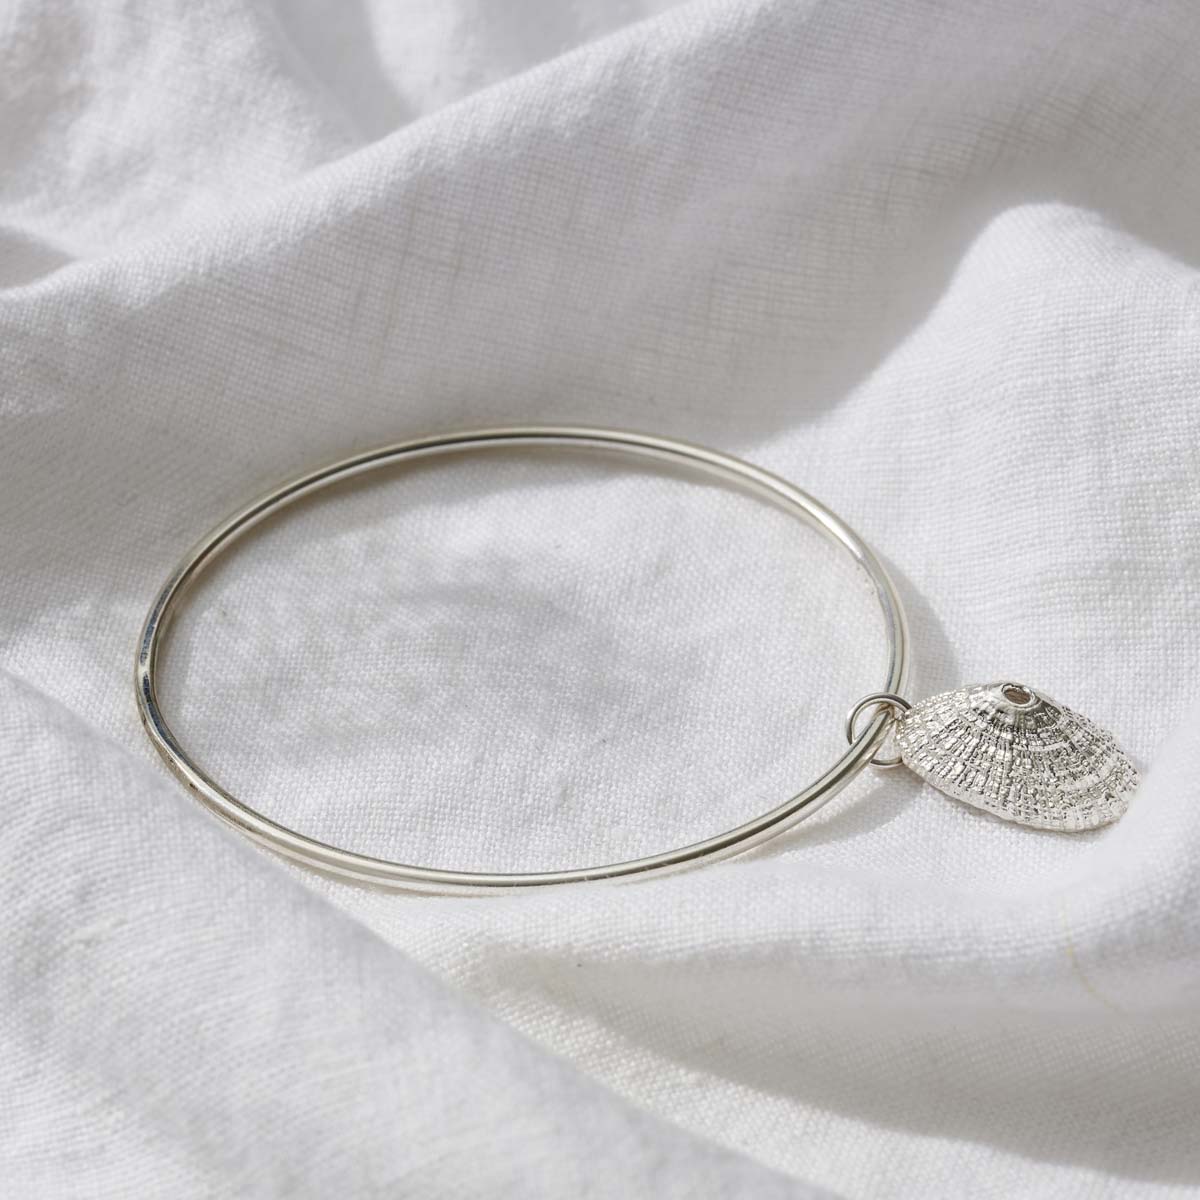 Posh Totty Designs Silver Limpet Shell Charm Bangle